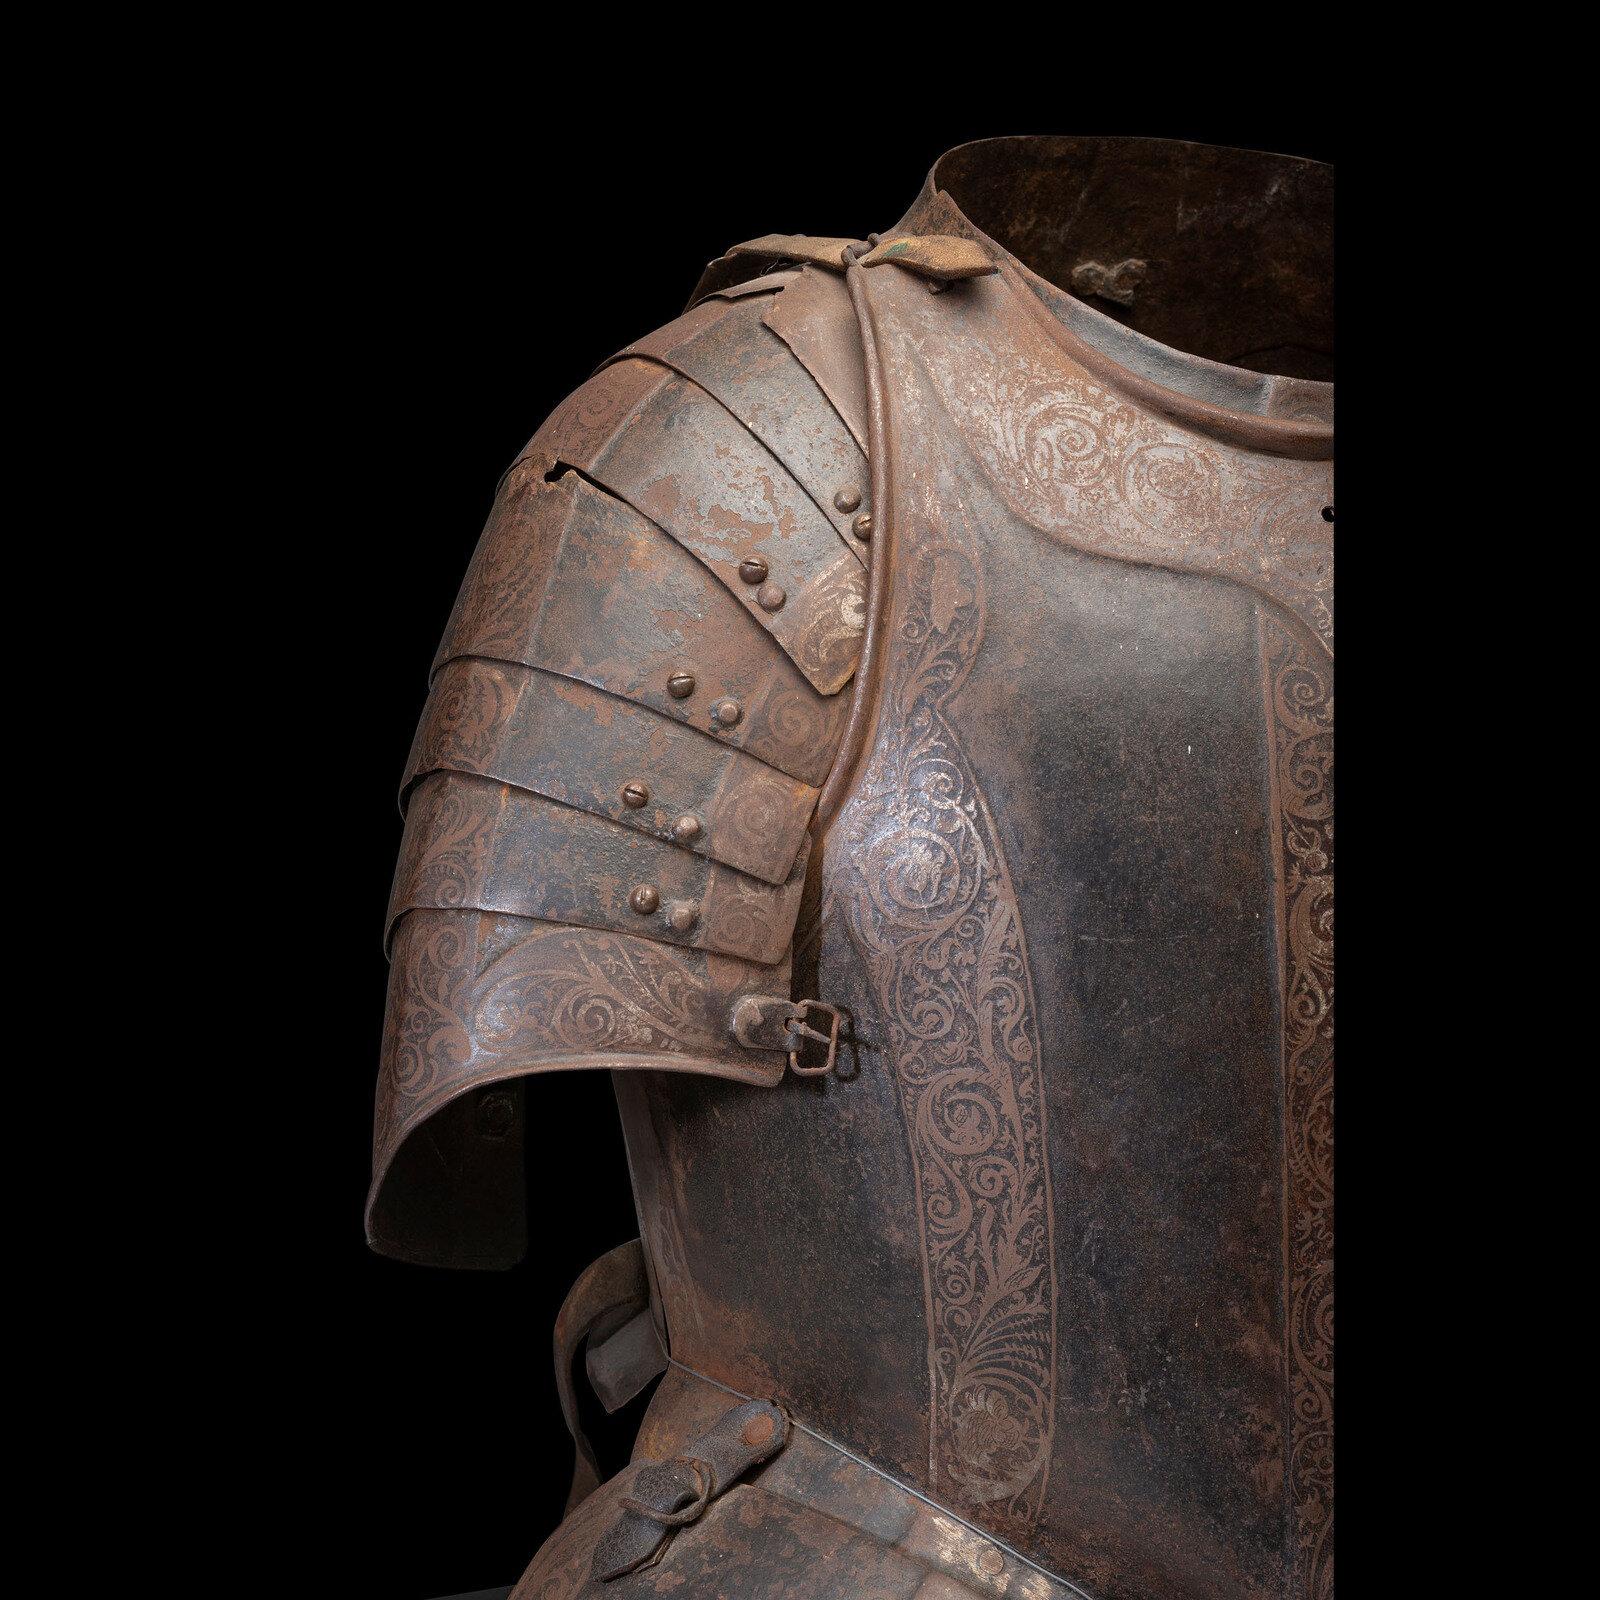 A 17th Century German Etched and Painted Half Suit of Armor